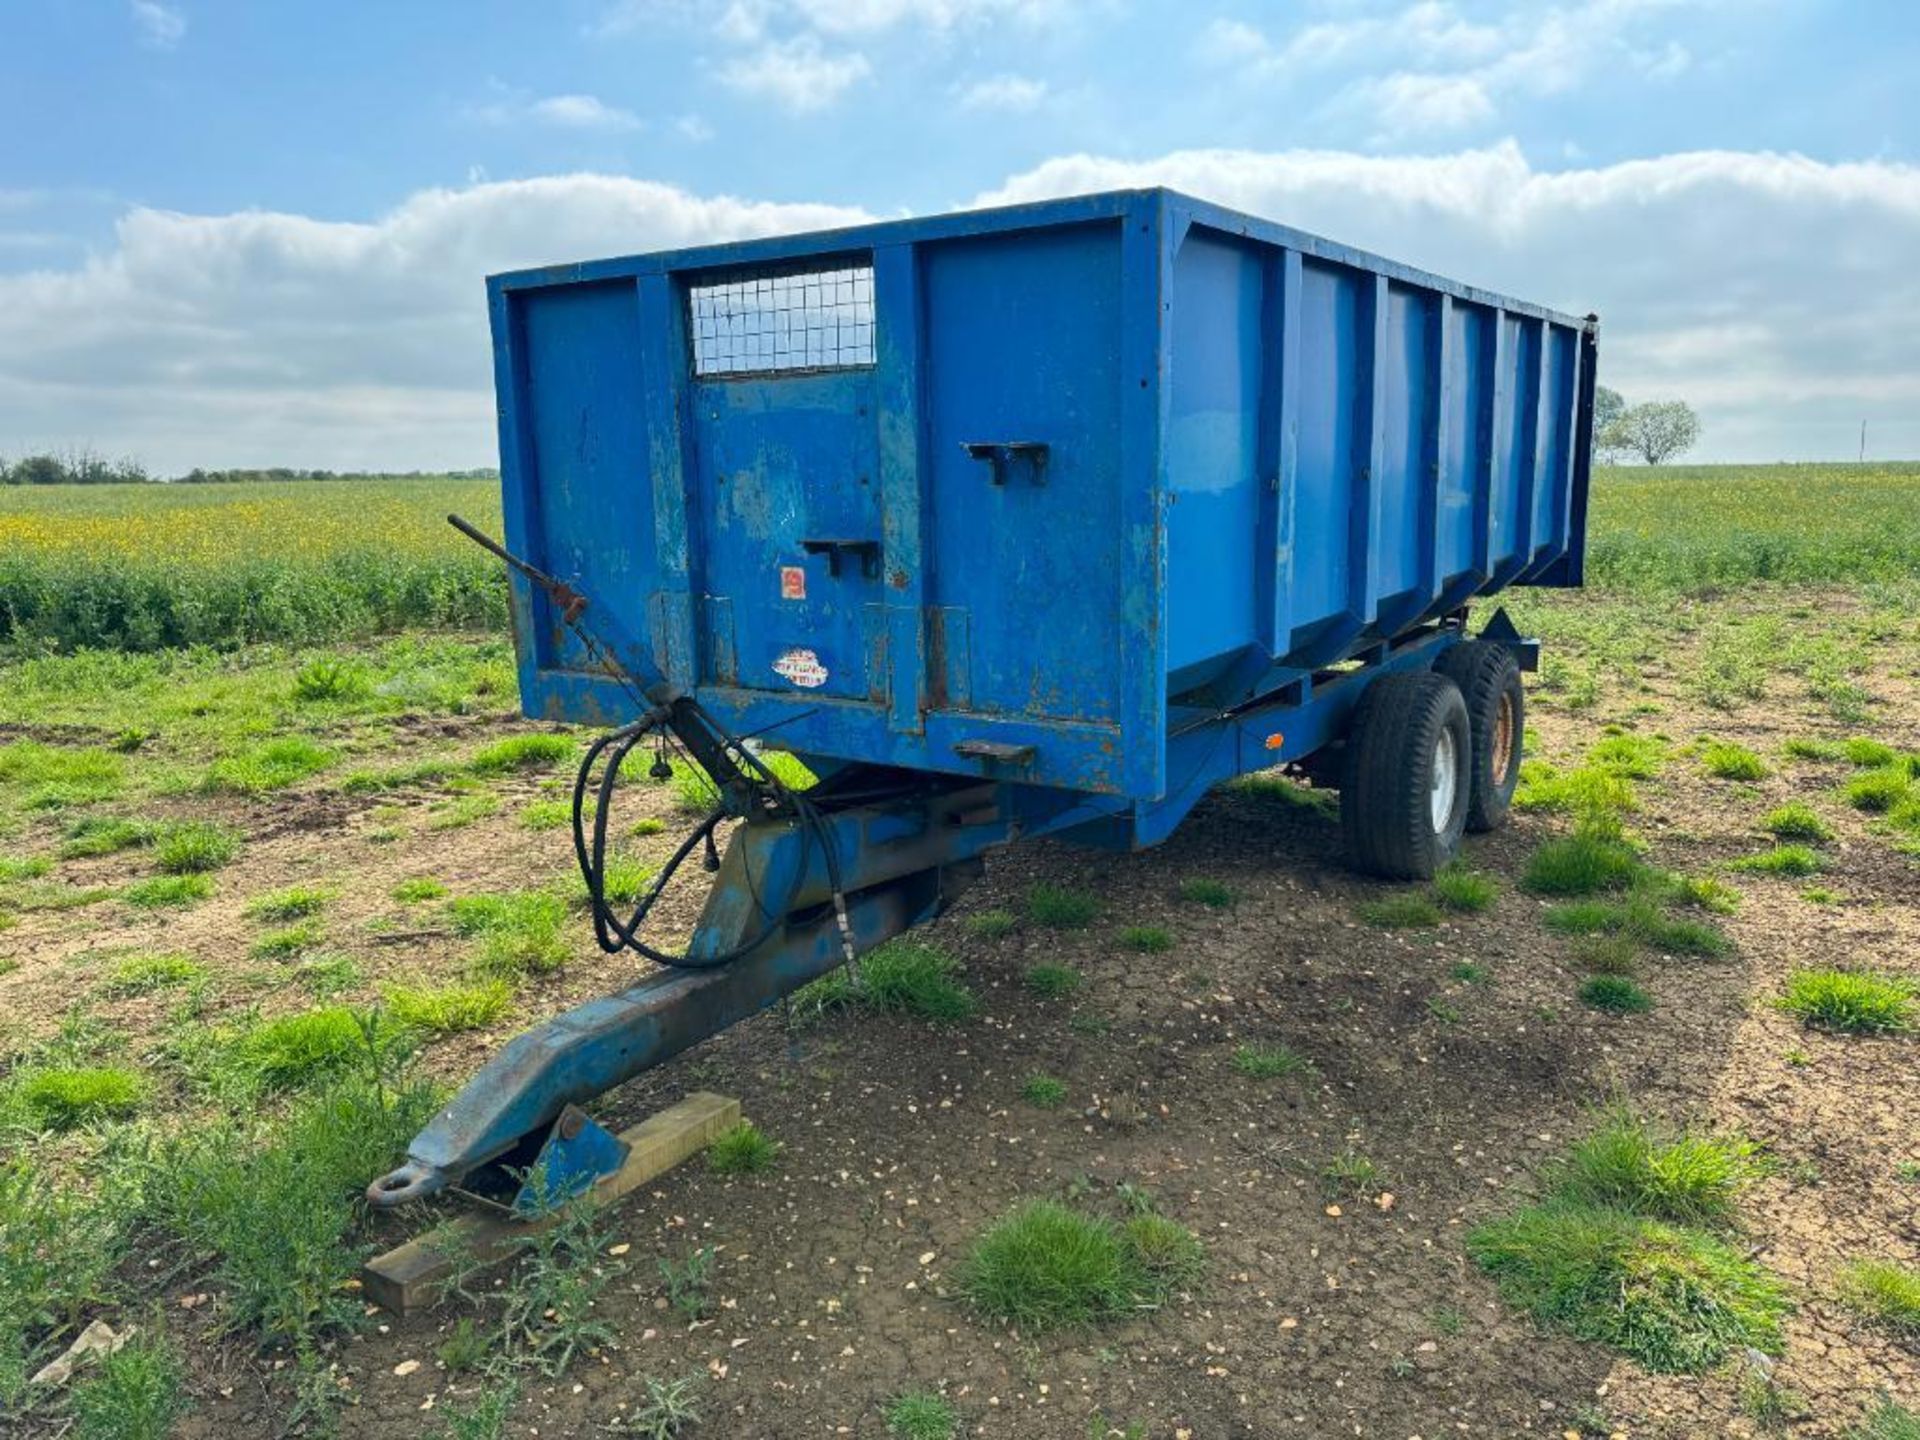 1978 AS Marston F10 10t twin axle grain trailer with manual tailgate and grain chute. Serial No: 418 - Image 2 of 6